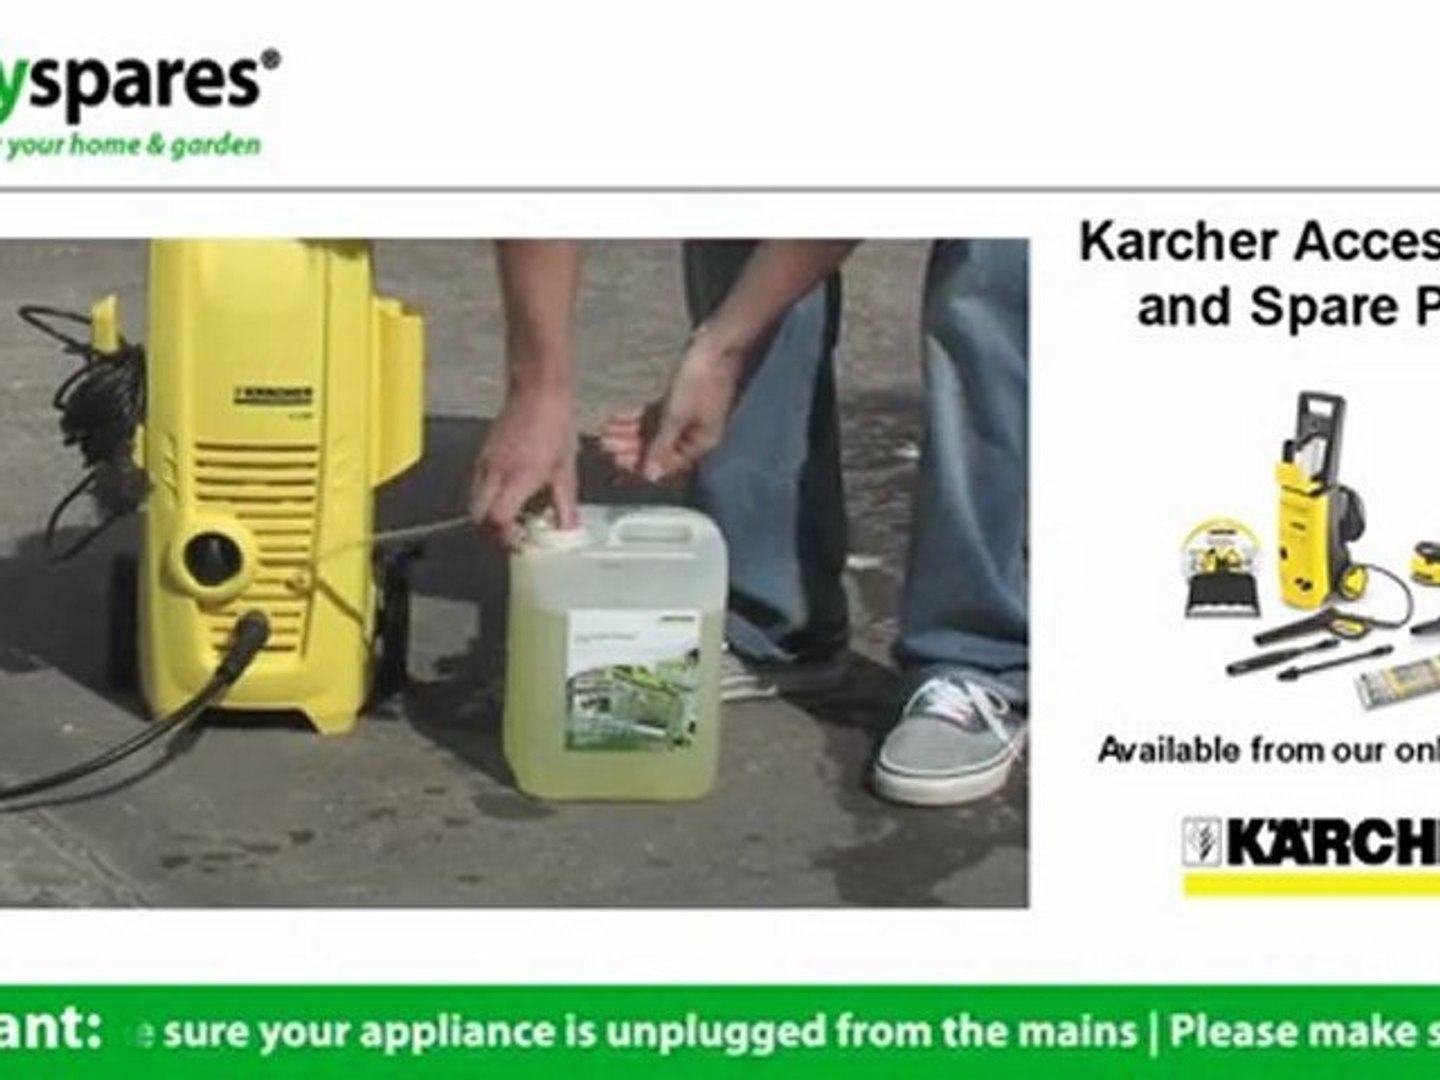 How to use detergent in your karcher pressure washer - video Dailymotion